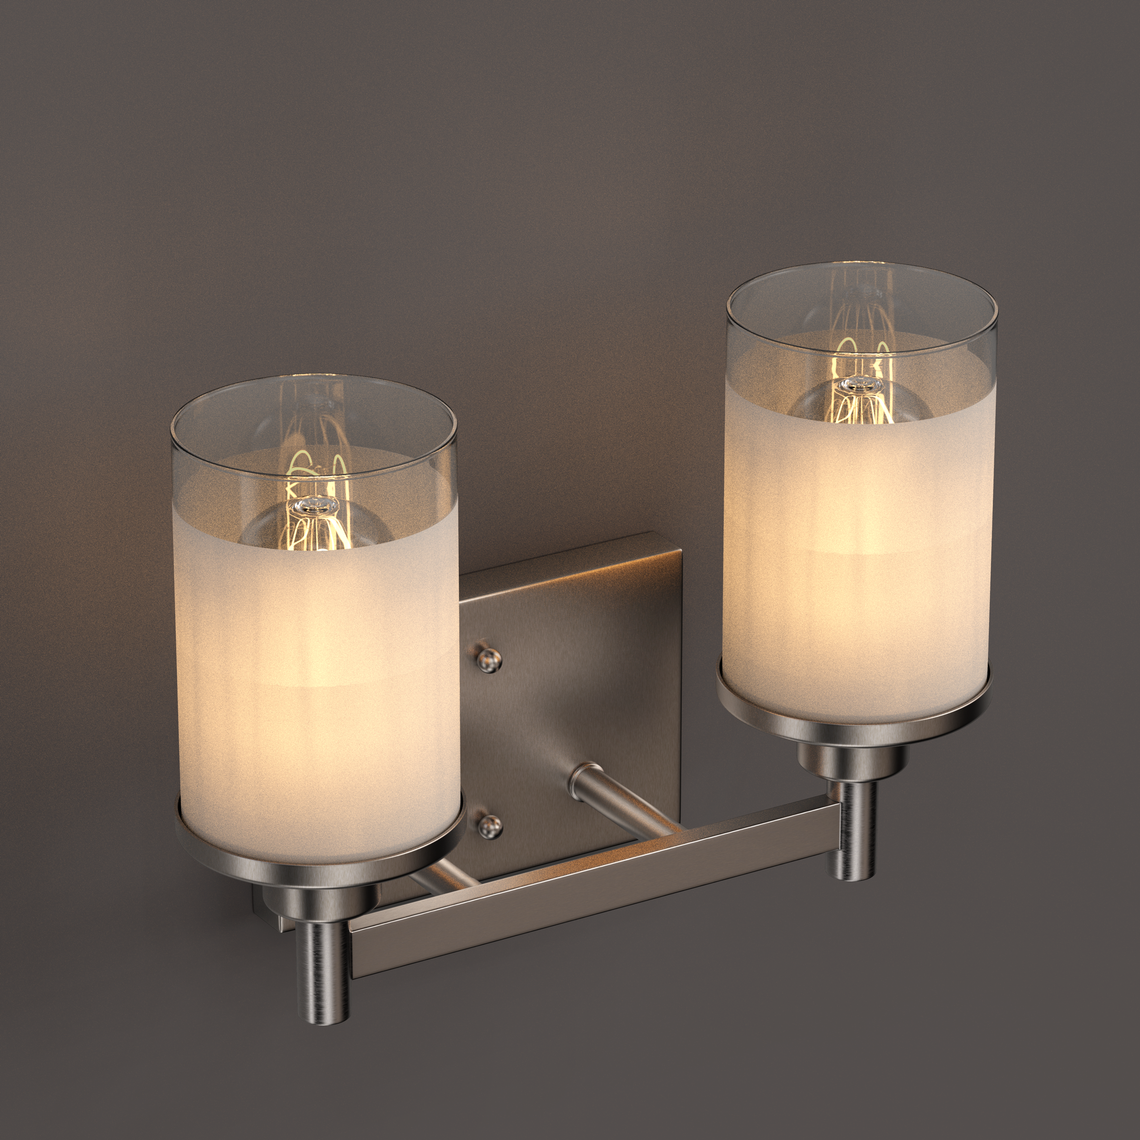 Cylinder Shape Bathroom Vanity Lights with Frosted Glass Shades